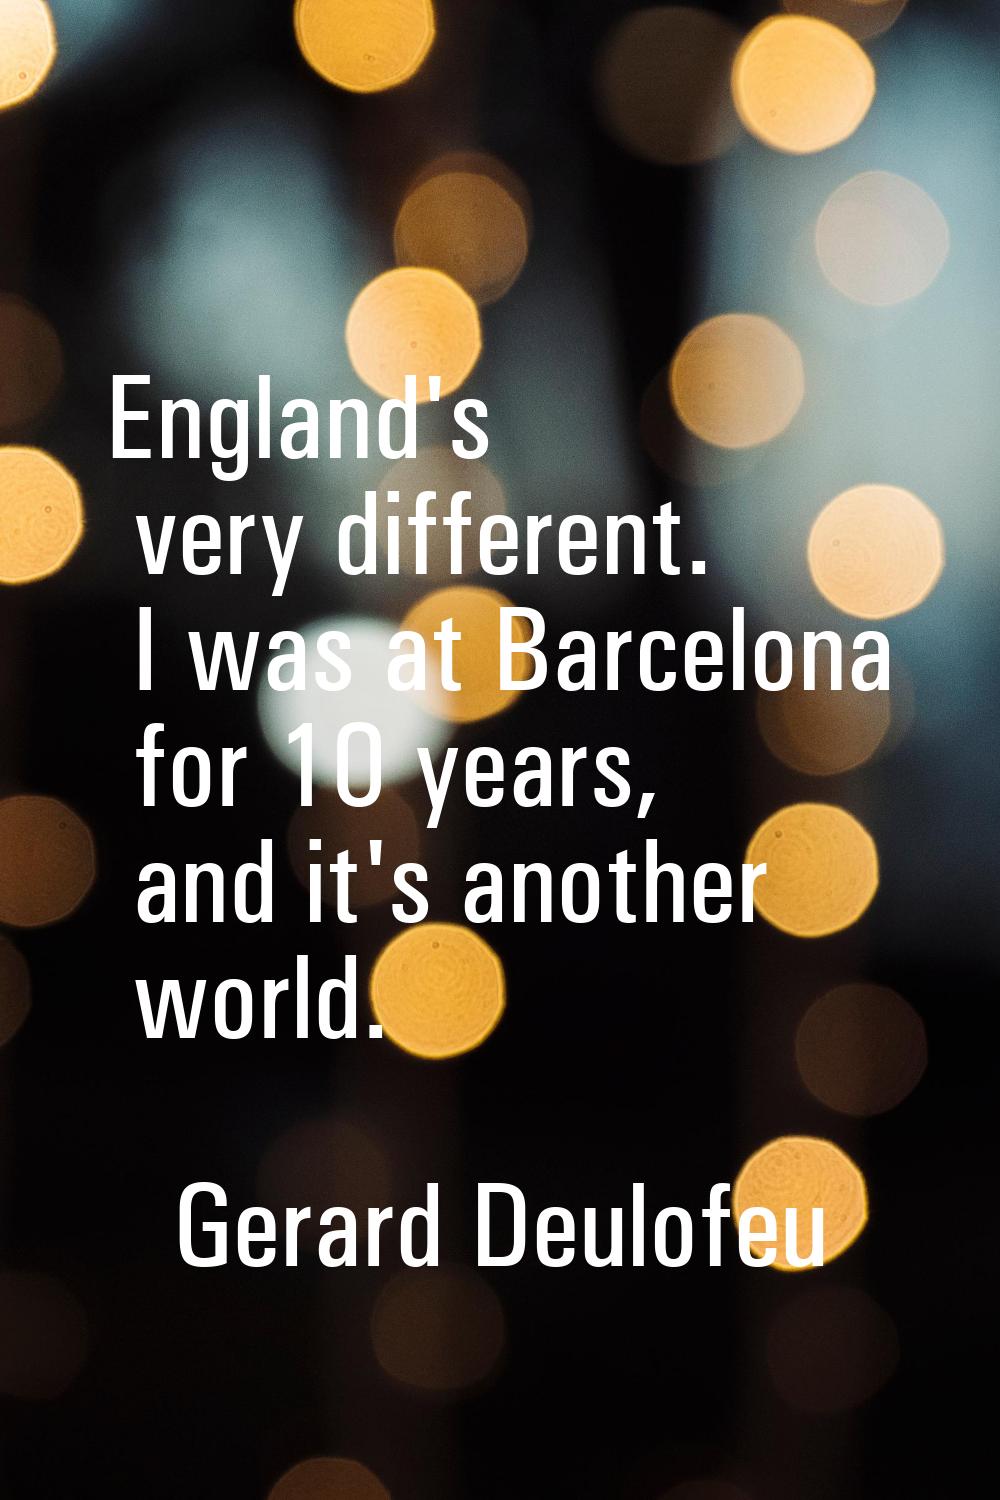 England's very different. I was at Barcelona for 10 years, and it's another world.